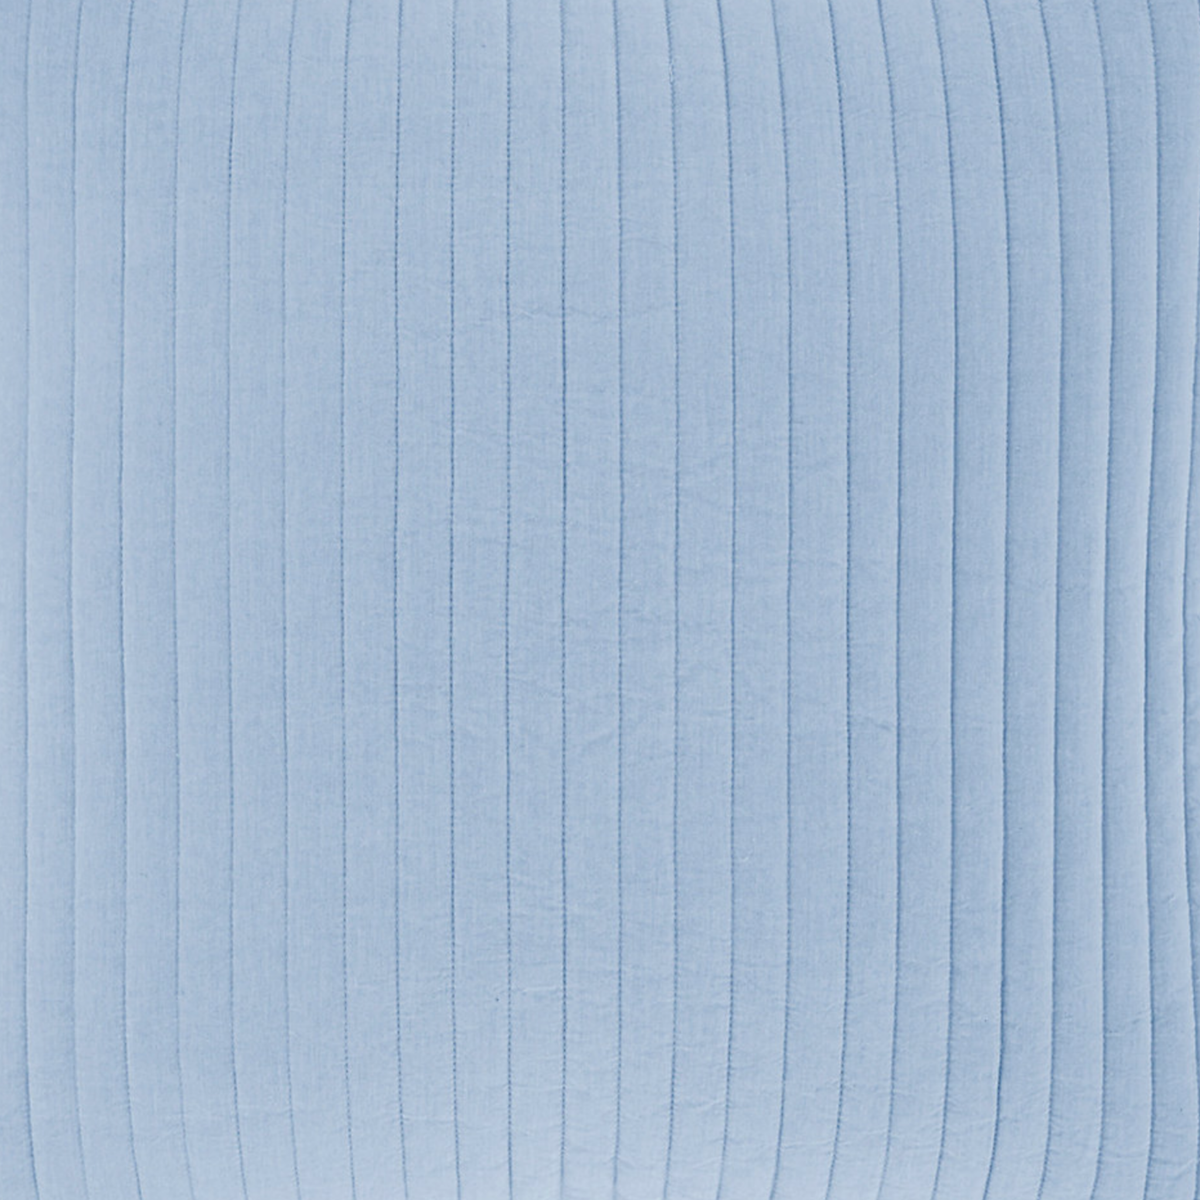 French Blue Swatch Sample of Pine Cone Hill Cozy Cotton Quilt Bedding